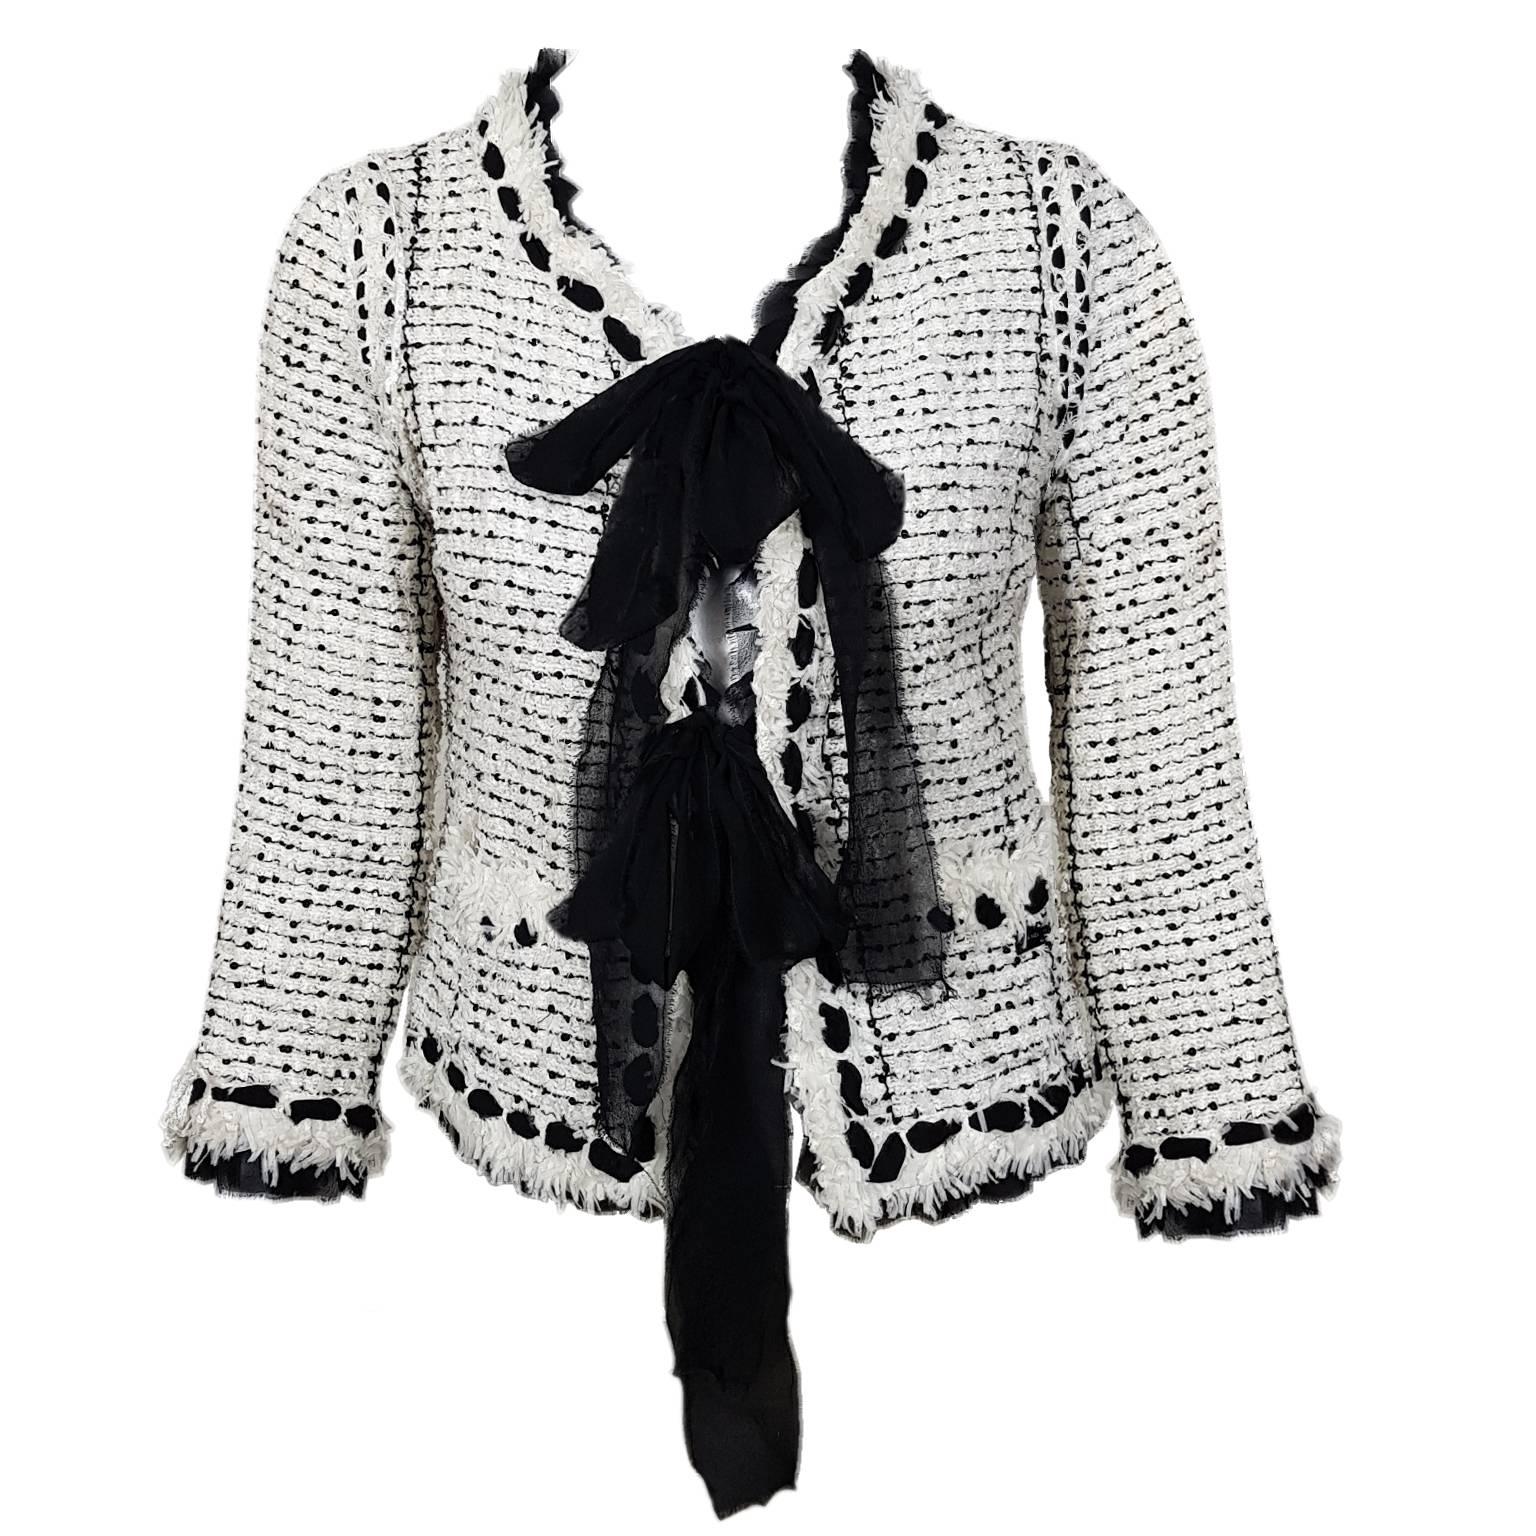 Chanel White Jacket Black Chiffon and Sequins S/S 2005